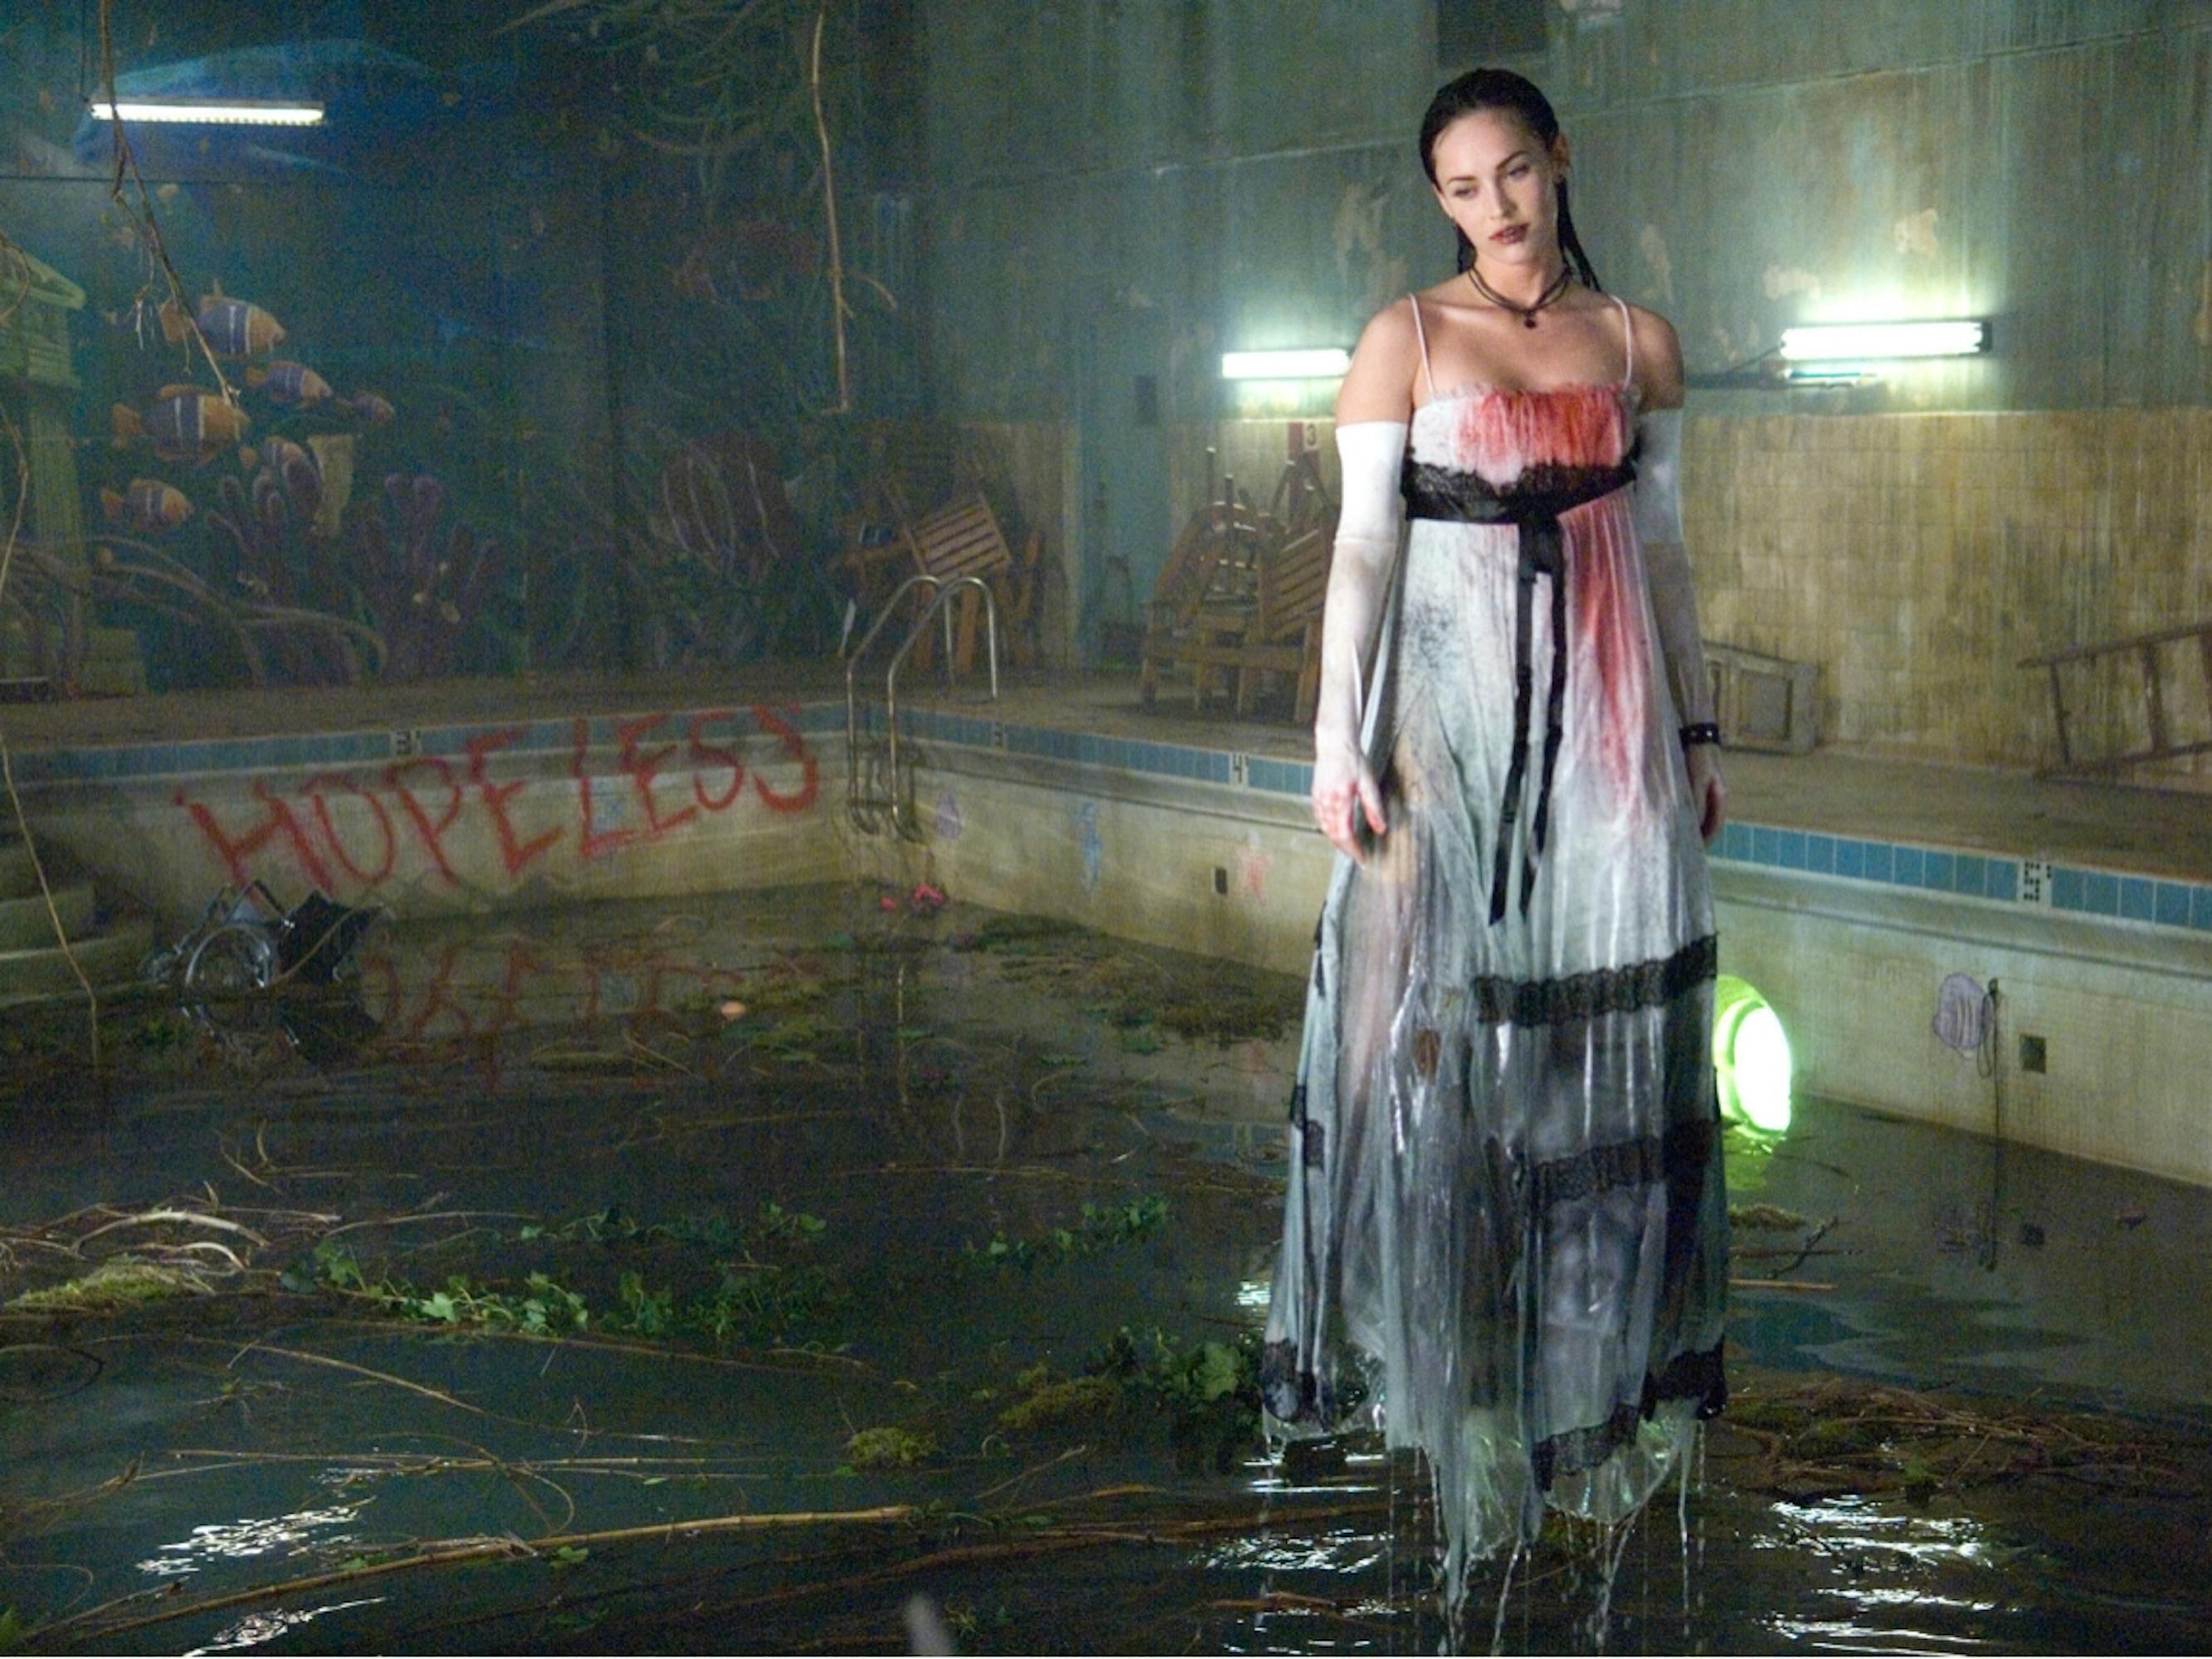 Jennifer Check (Megan Fox) in Jennifer’s Body. She wears a white dress which is streaked with black and red, and stands in a pool cluttered with branches and leaves.